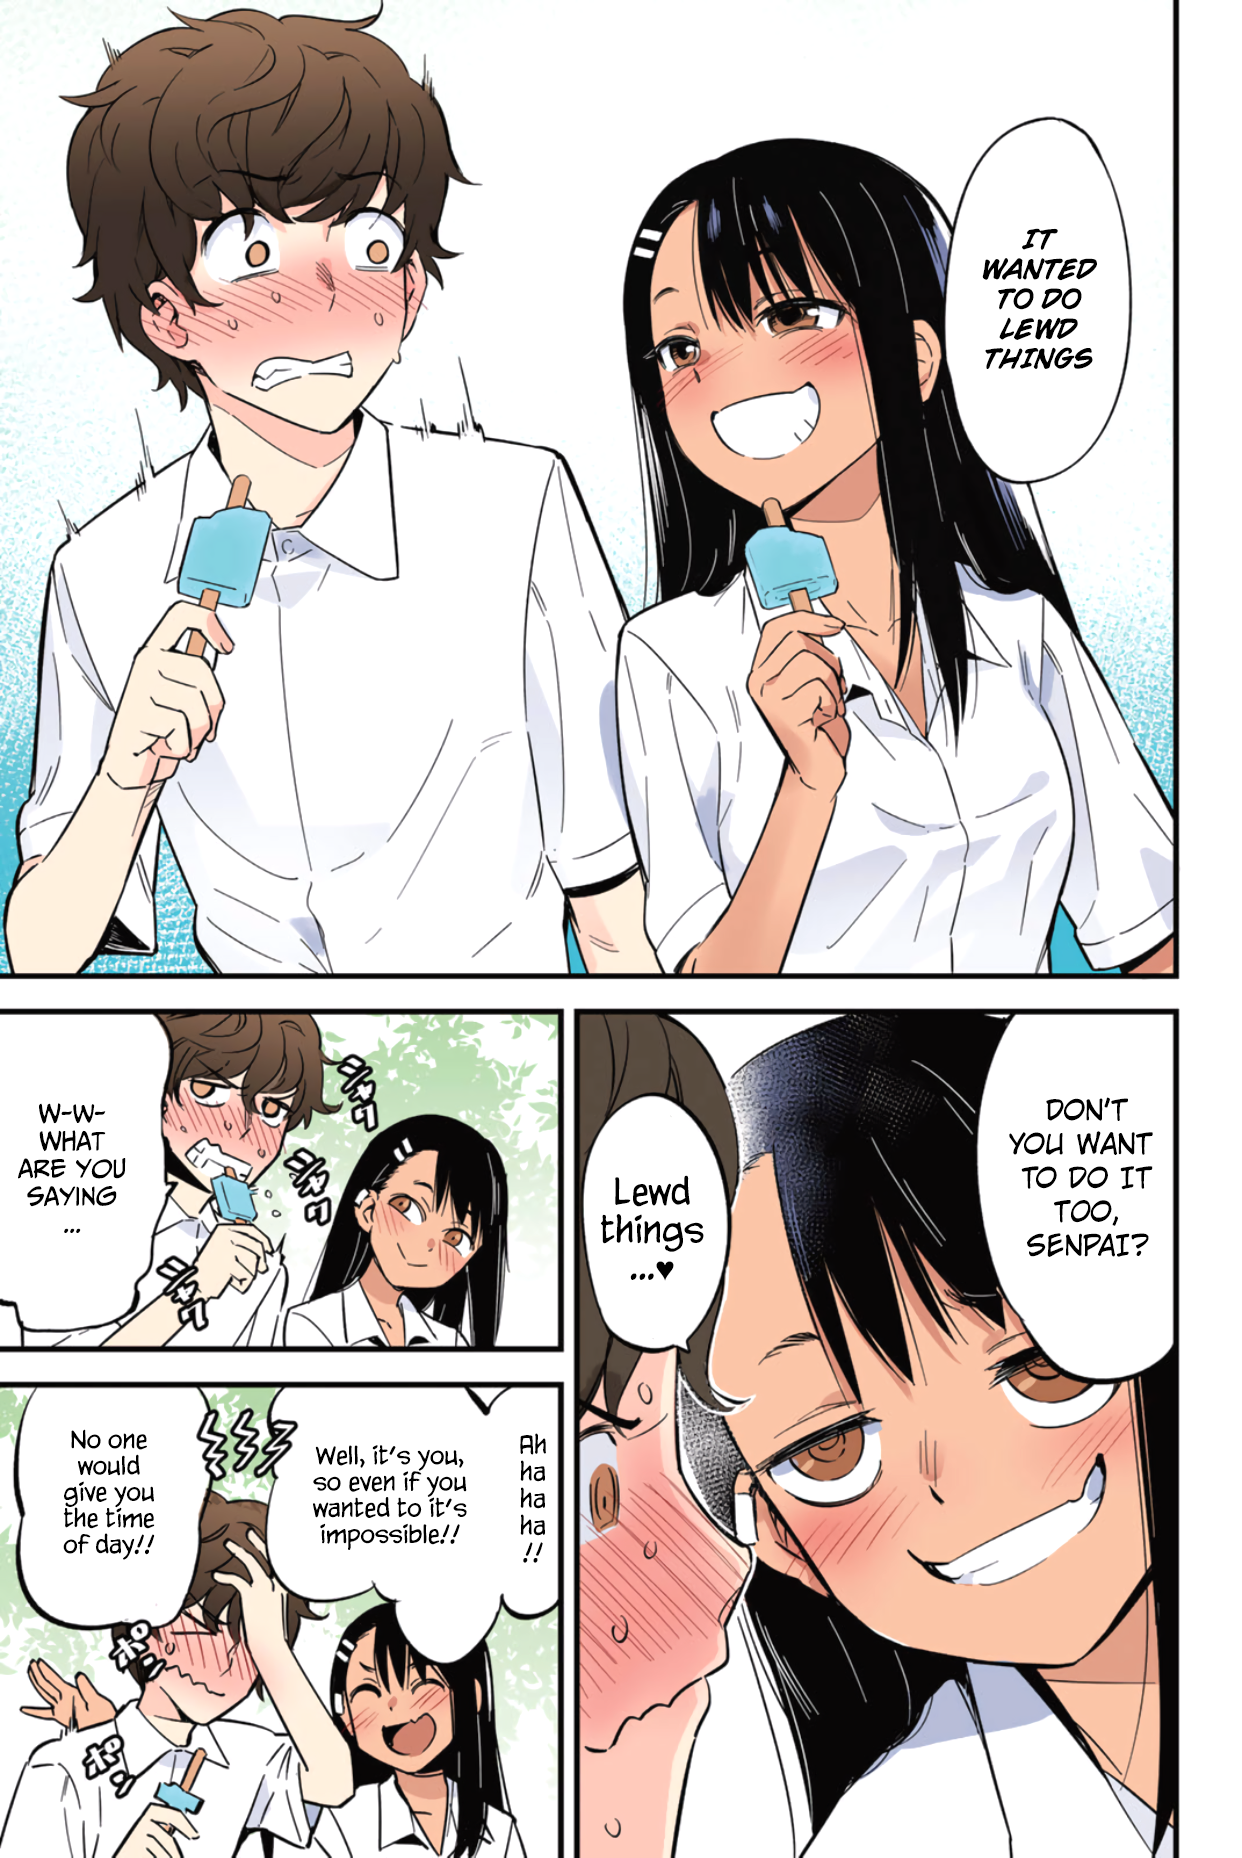 Ijiranaide, Nagatoro-San Vol.2 Chapter 14.3: Colored Omake 1: Don't You Want To Do It Too, Senpai? - Picture 2